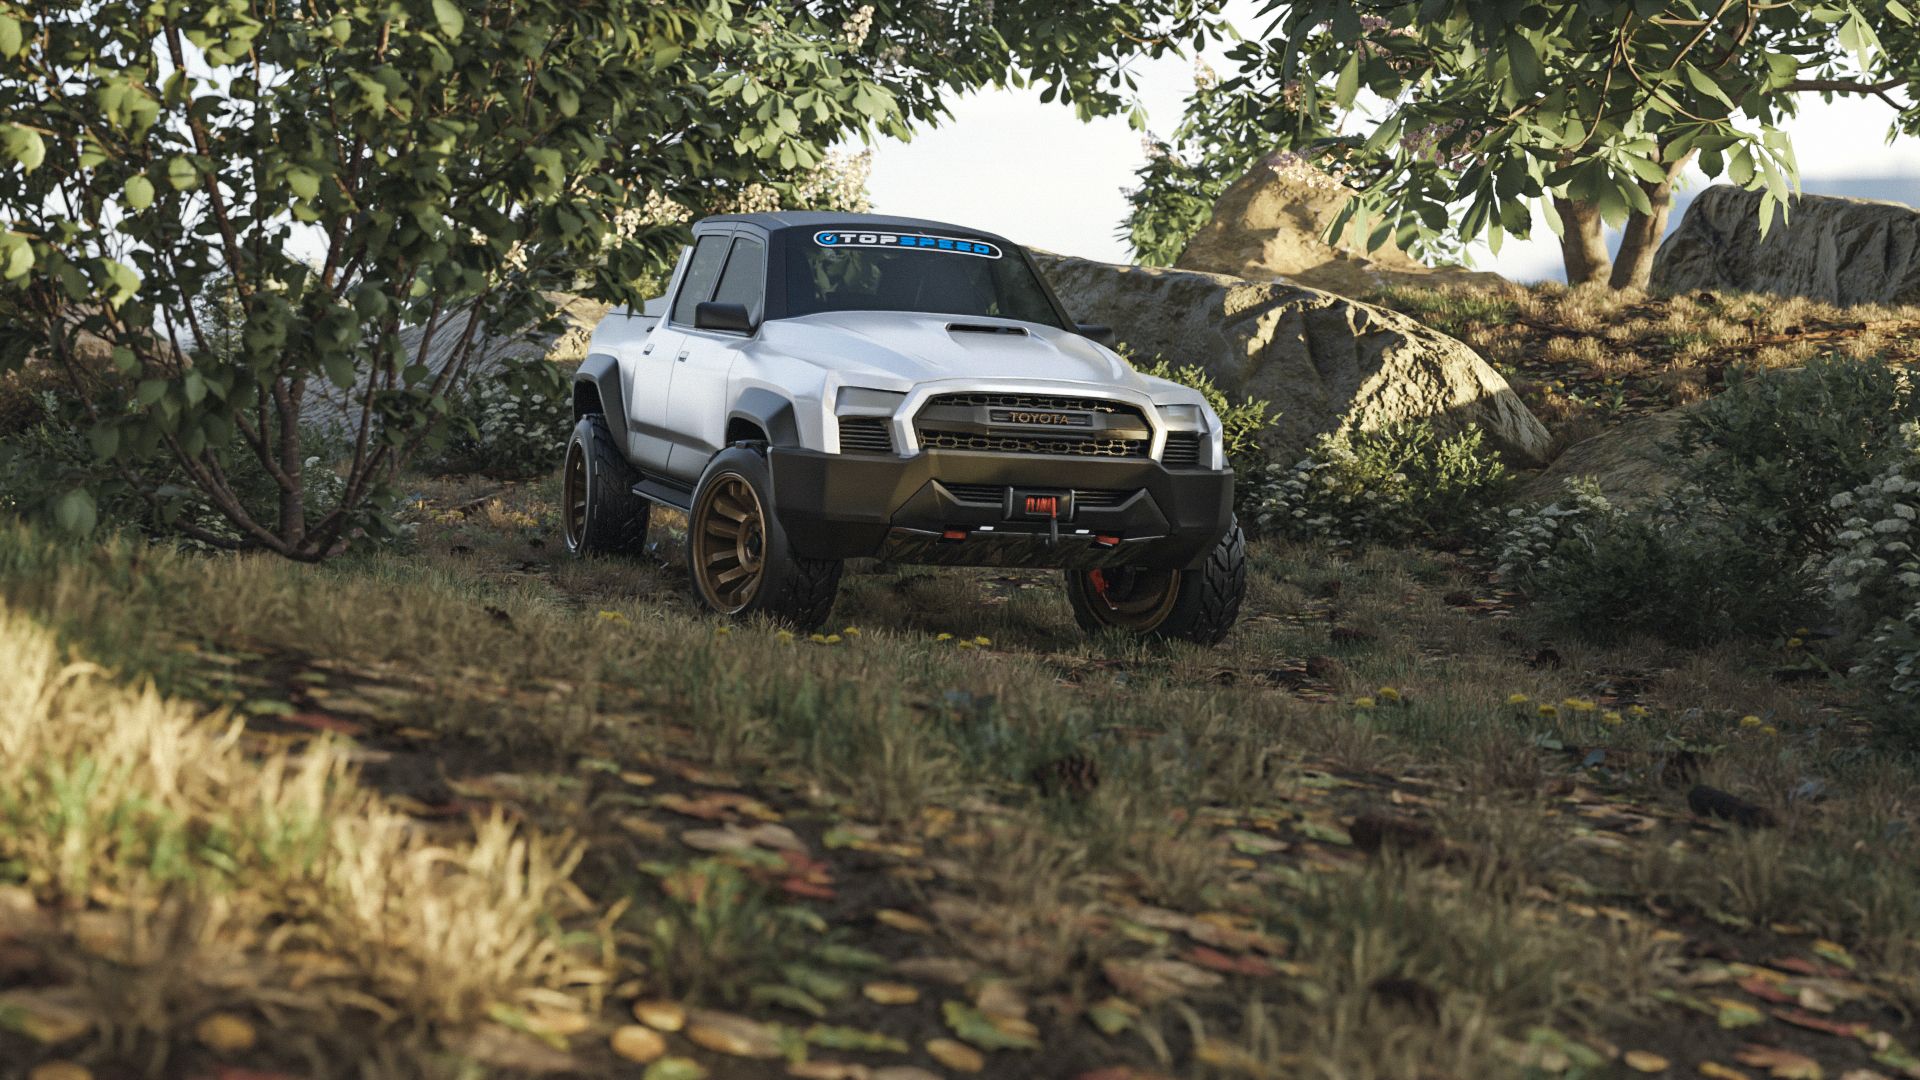 Toyota Stout TRD White Off-Road Vehicle